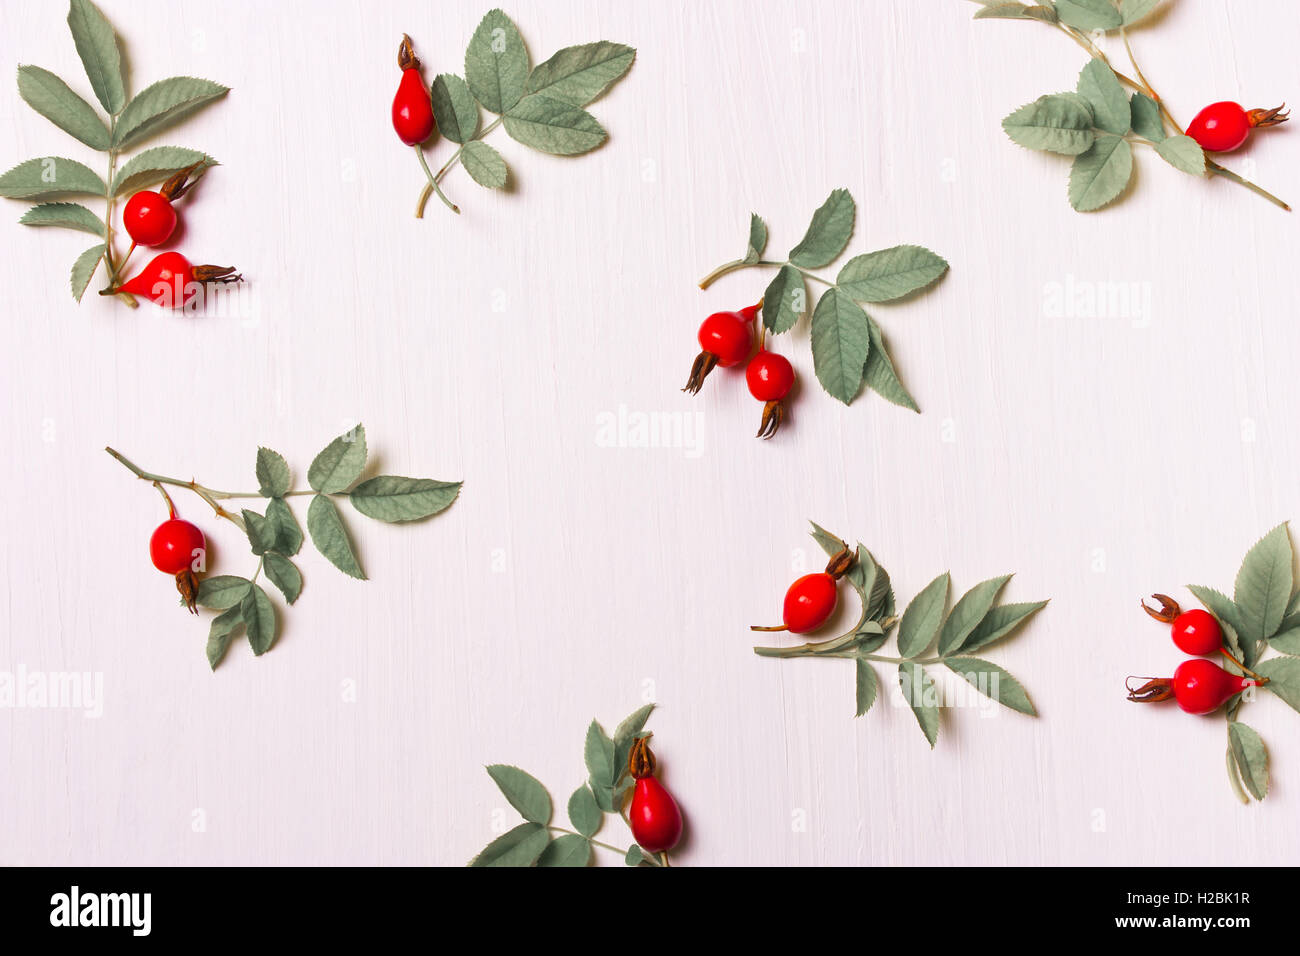 pattern, composition of red flowers, berries and green leaves on a white background.Flat lay, top view. Stock Photo